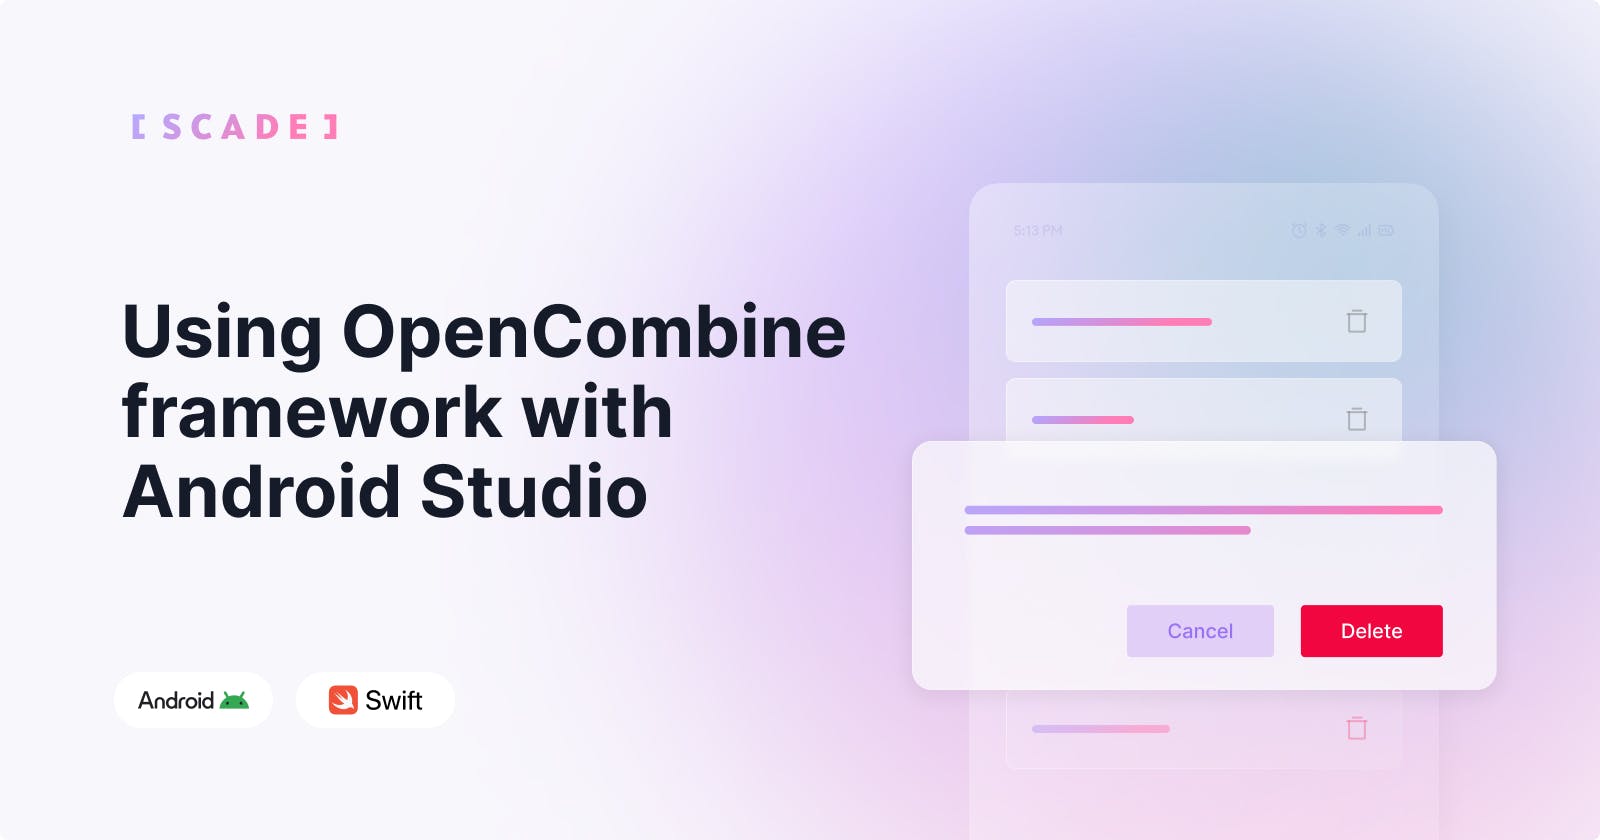 How to use the OpenCombine framework with Android Studio